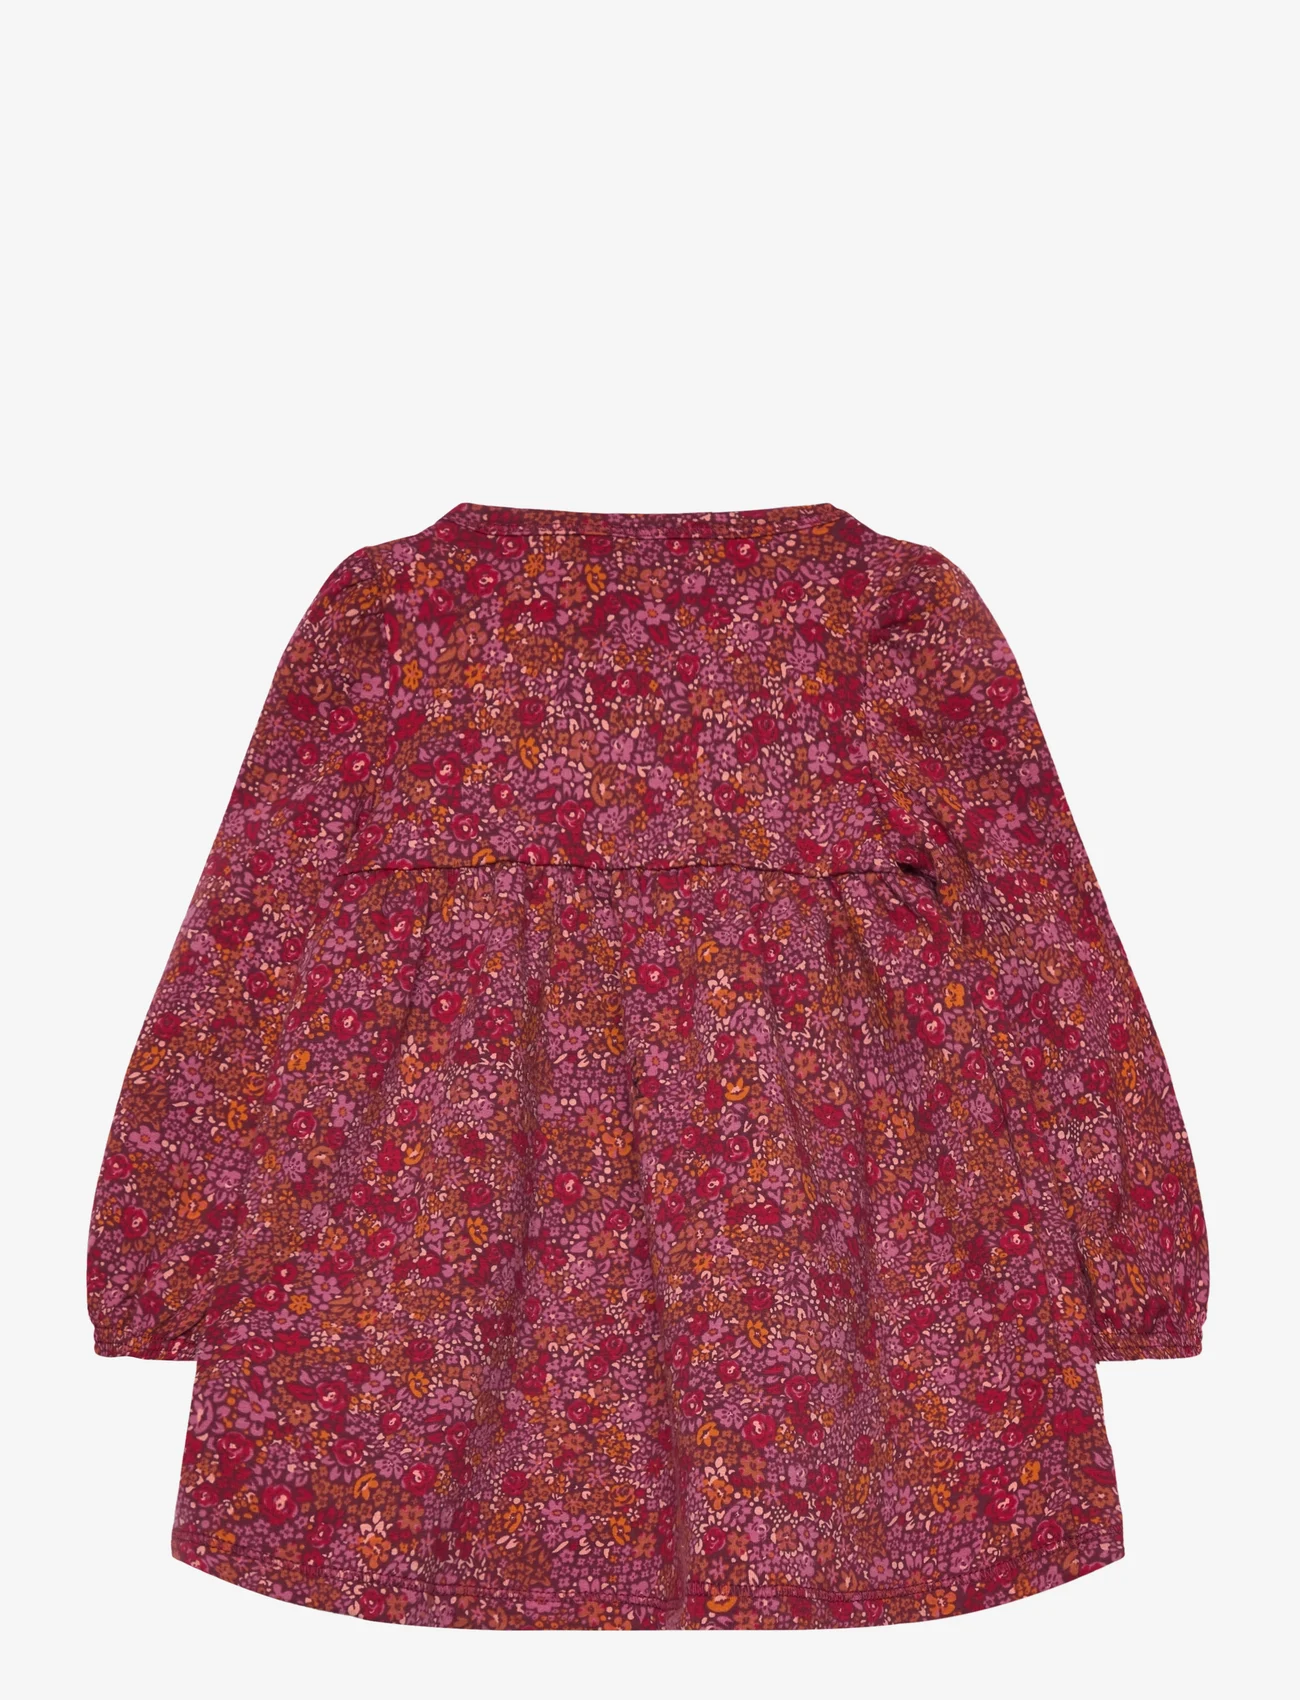 Müsli by Green Cotton - Petit blossom l/s dress baby - long-sleeved casual dresses - fig/boysenberry/berry red - 1